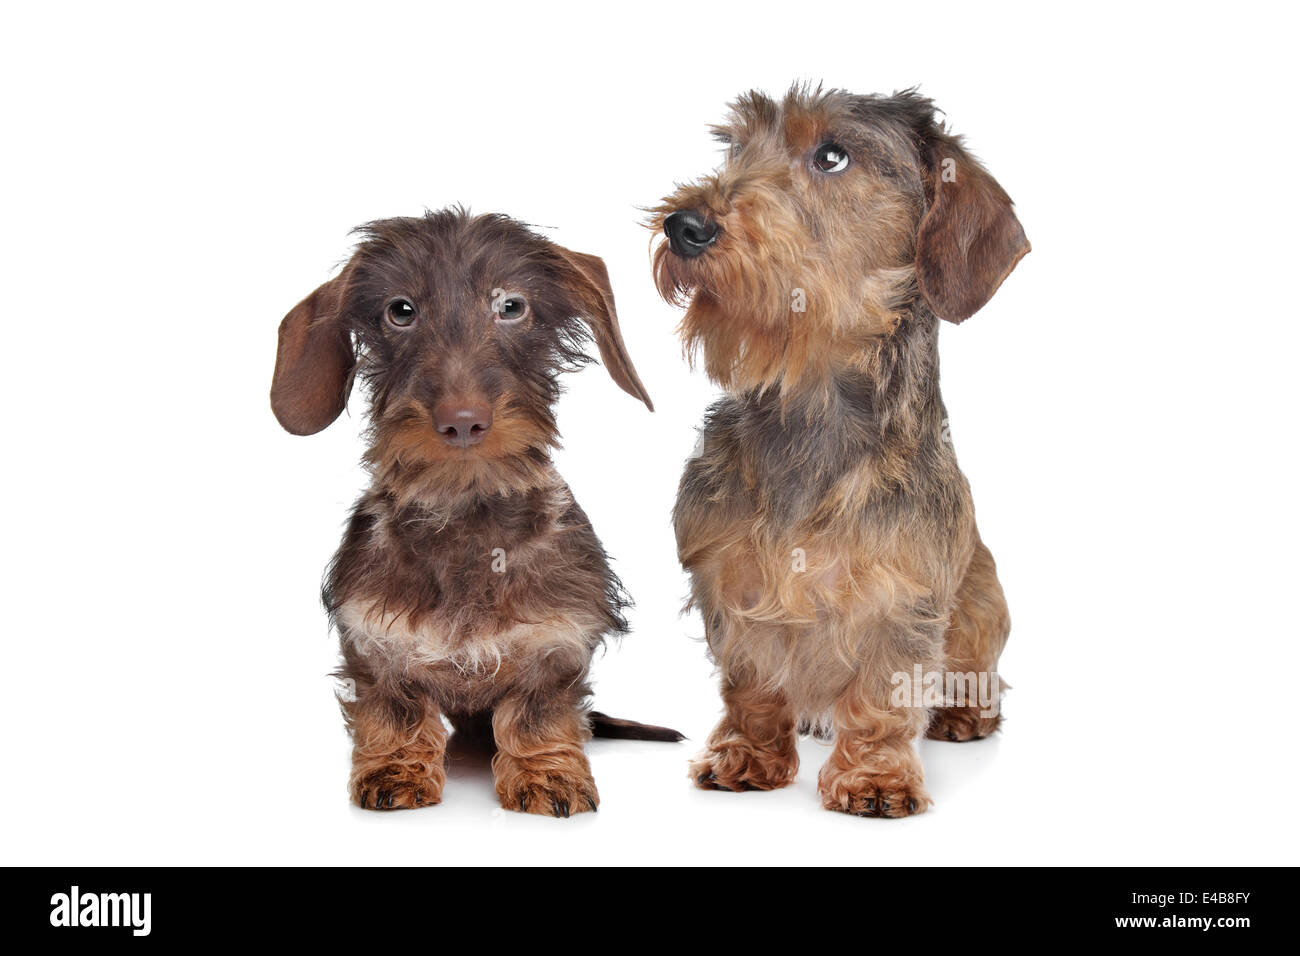 Two miniature Wire-haired dachshund dogs Stock Photo